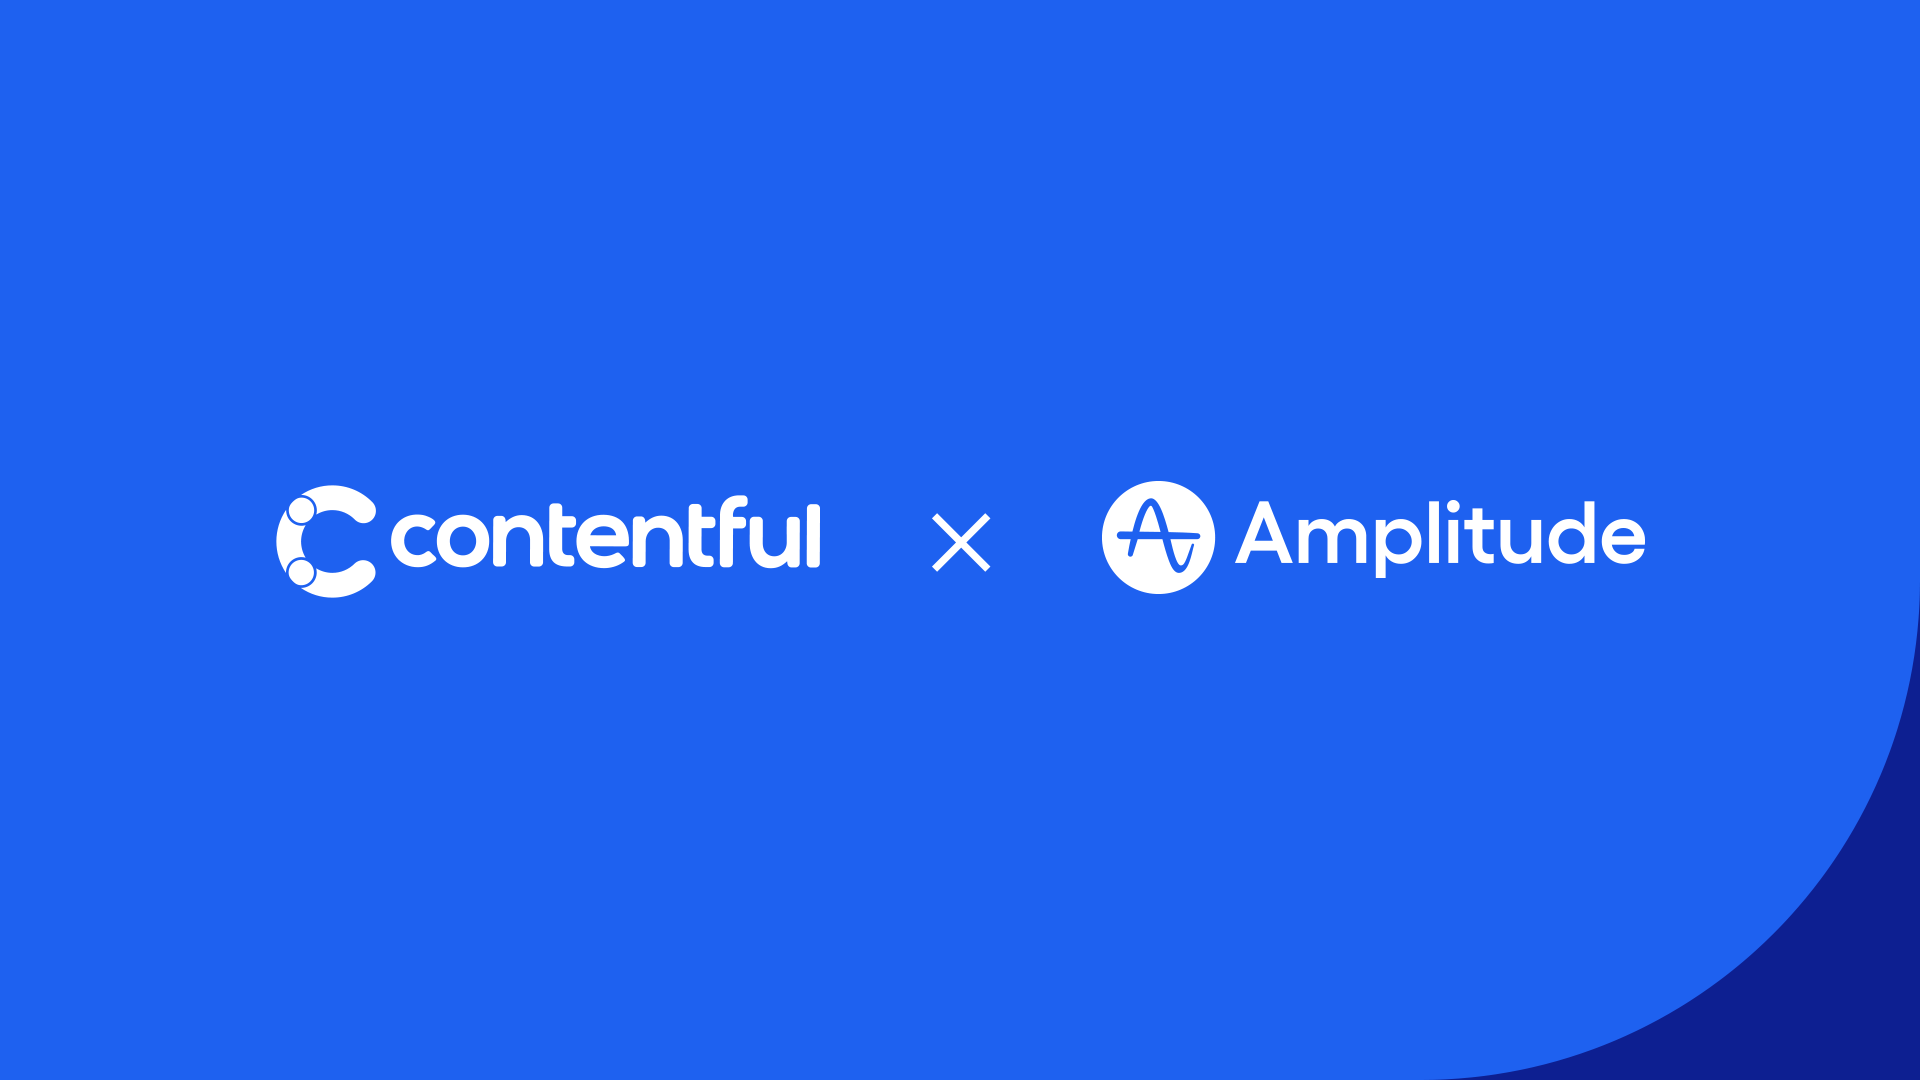 Learn how Amplitude’s new Contentful integration unlocks no-code experiments to build better web experiences without engineering support 